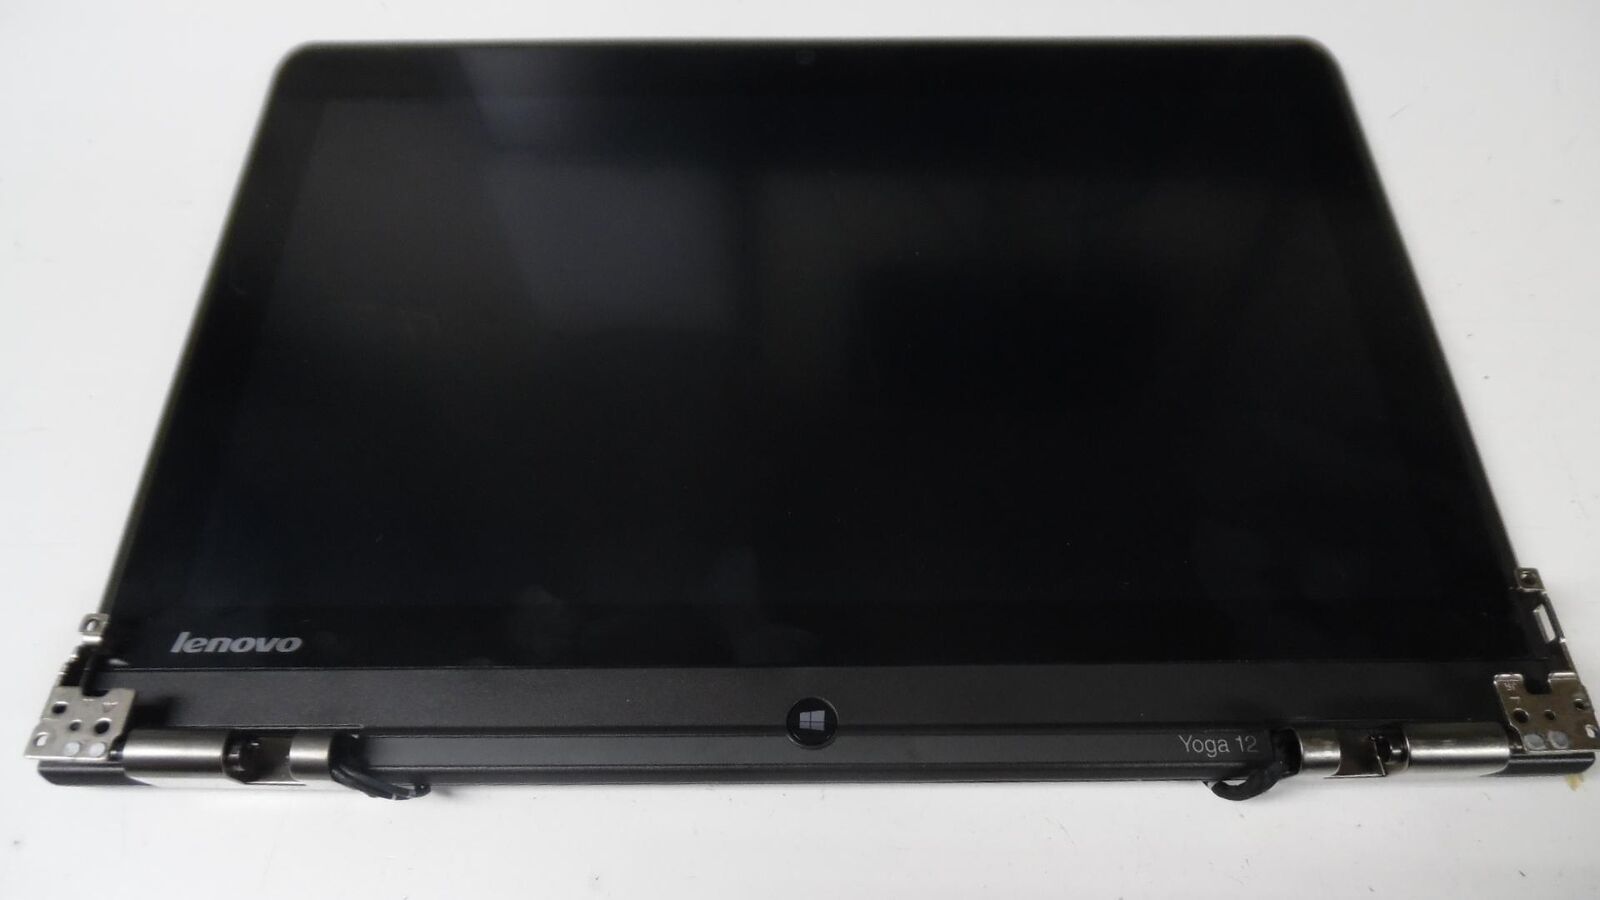 Display Assembly w/Cables & Hinges for Lenovo ThinkPad Yoga 12 # Tested